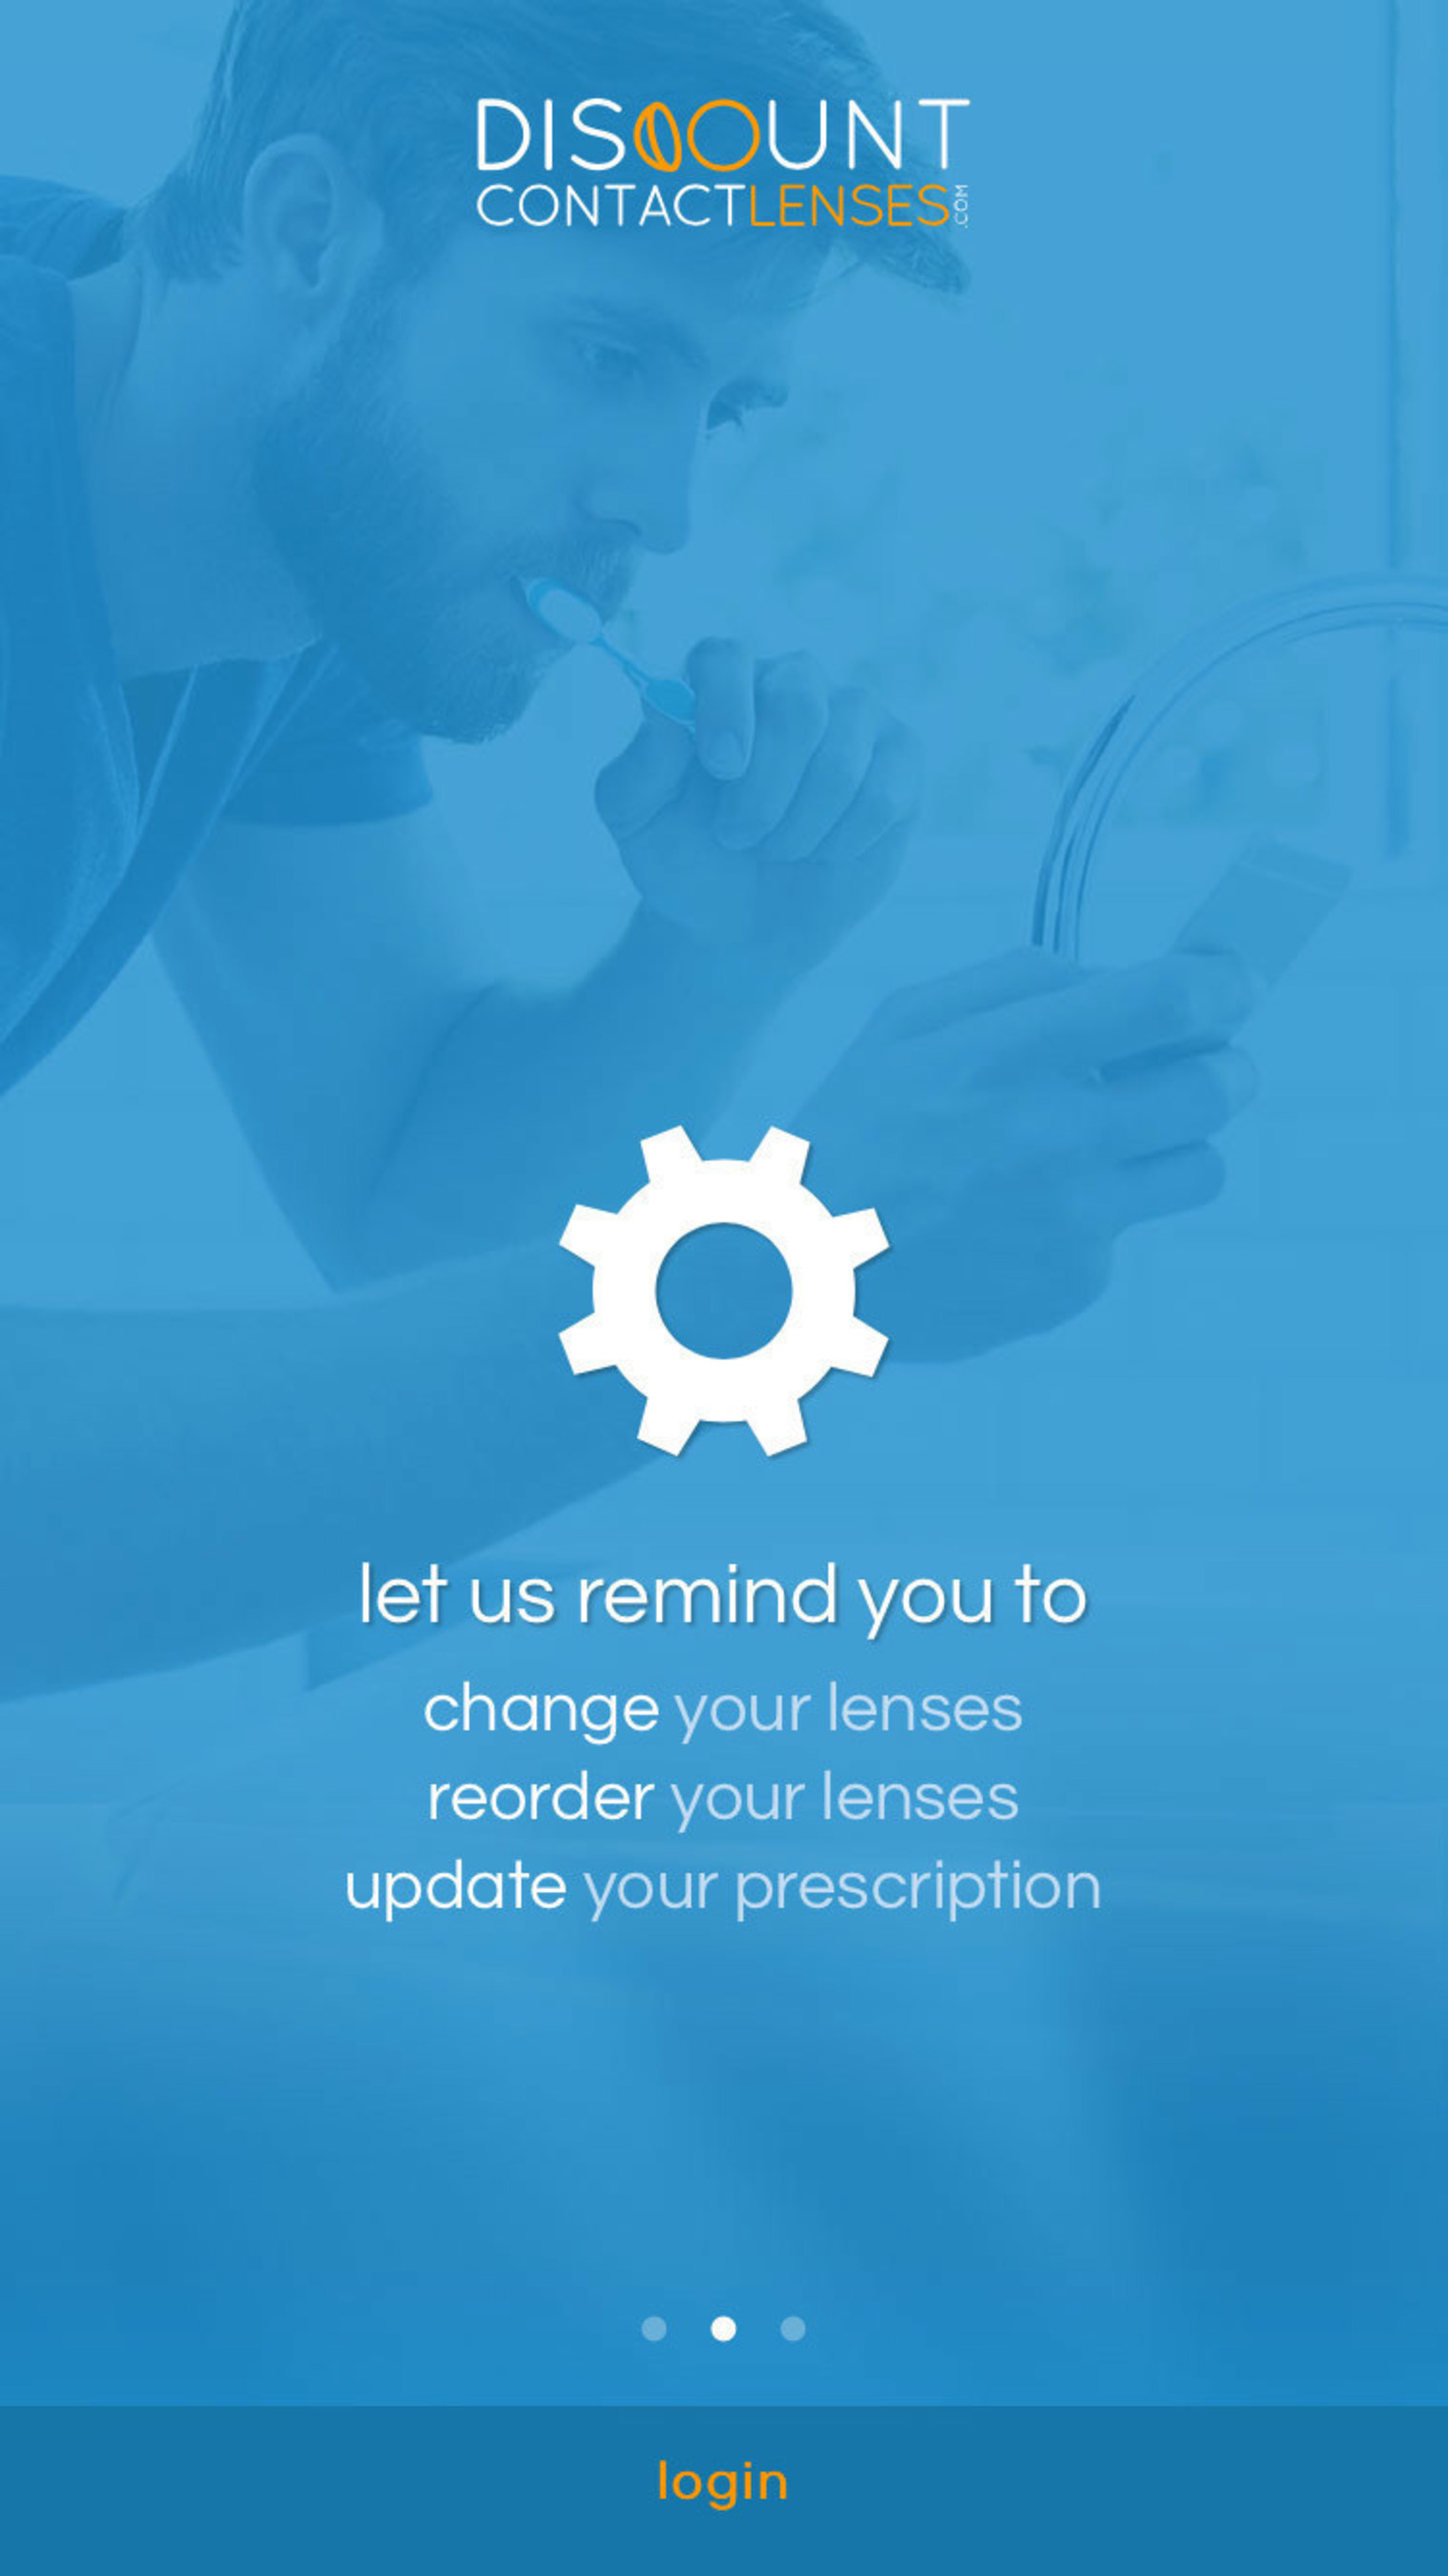 DiscountContactLenses.com new mobile app allows you to get reminders when to see the eye doctor, change your contacts, or reorder contact lenses. Available for Apple and Android phones.